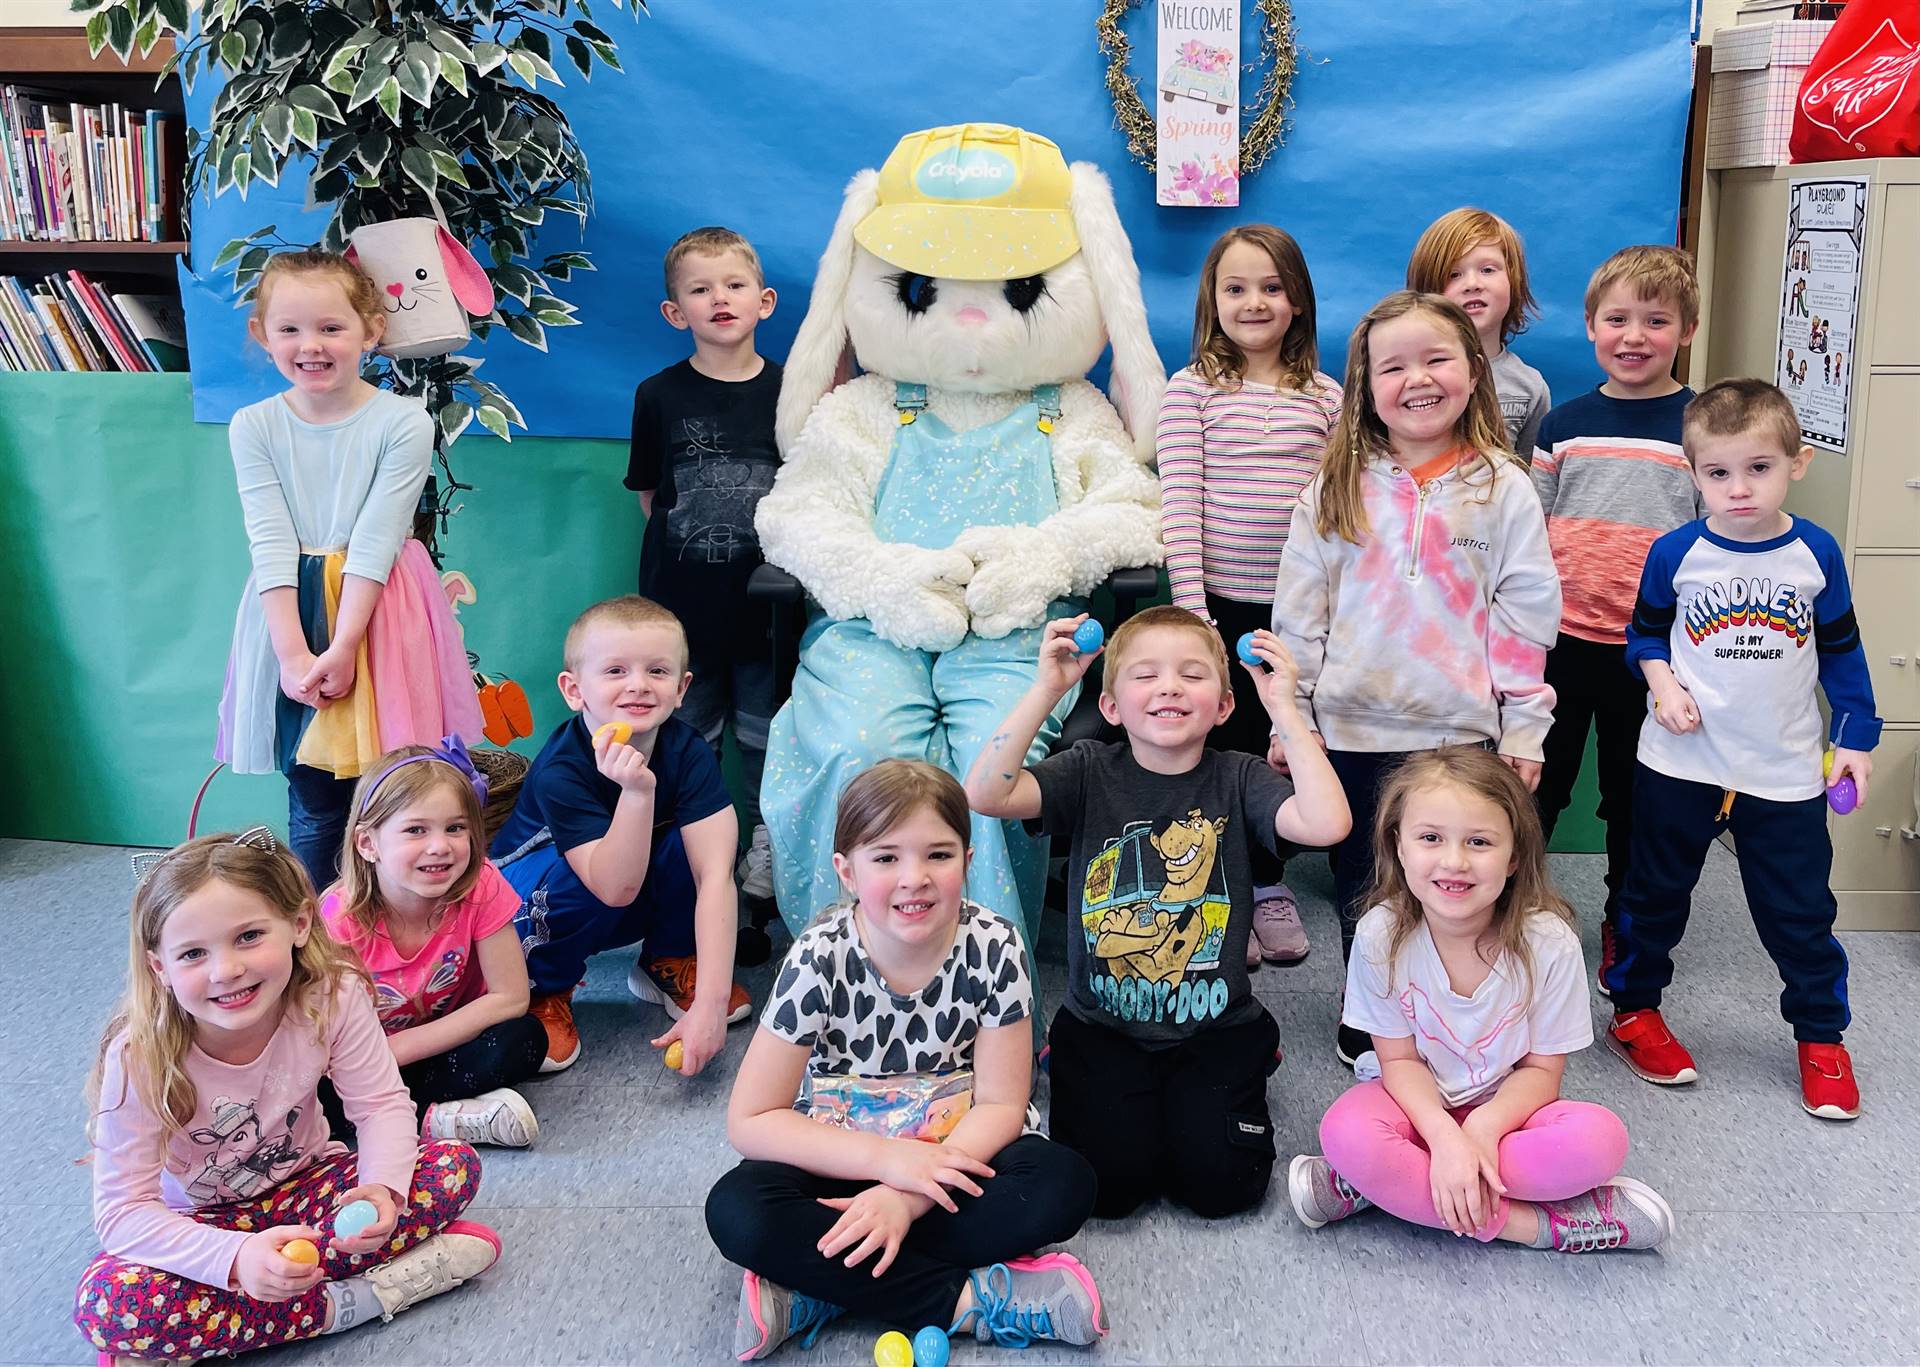 a group of students with adult dressed as a bunny in middle.